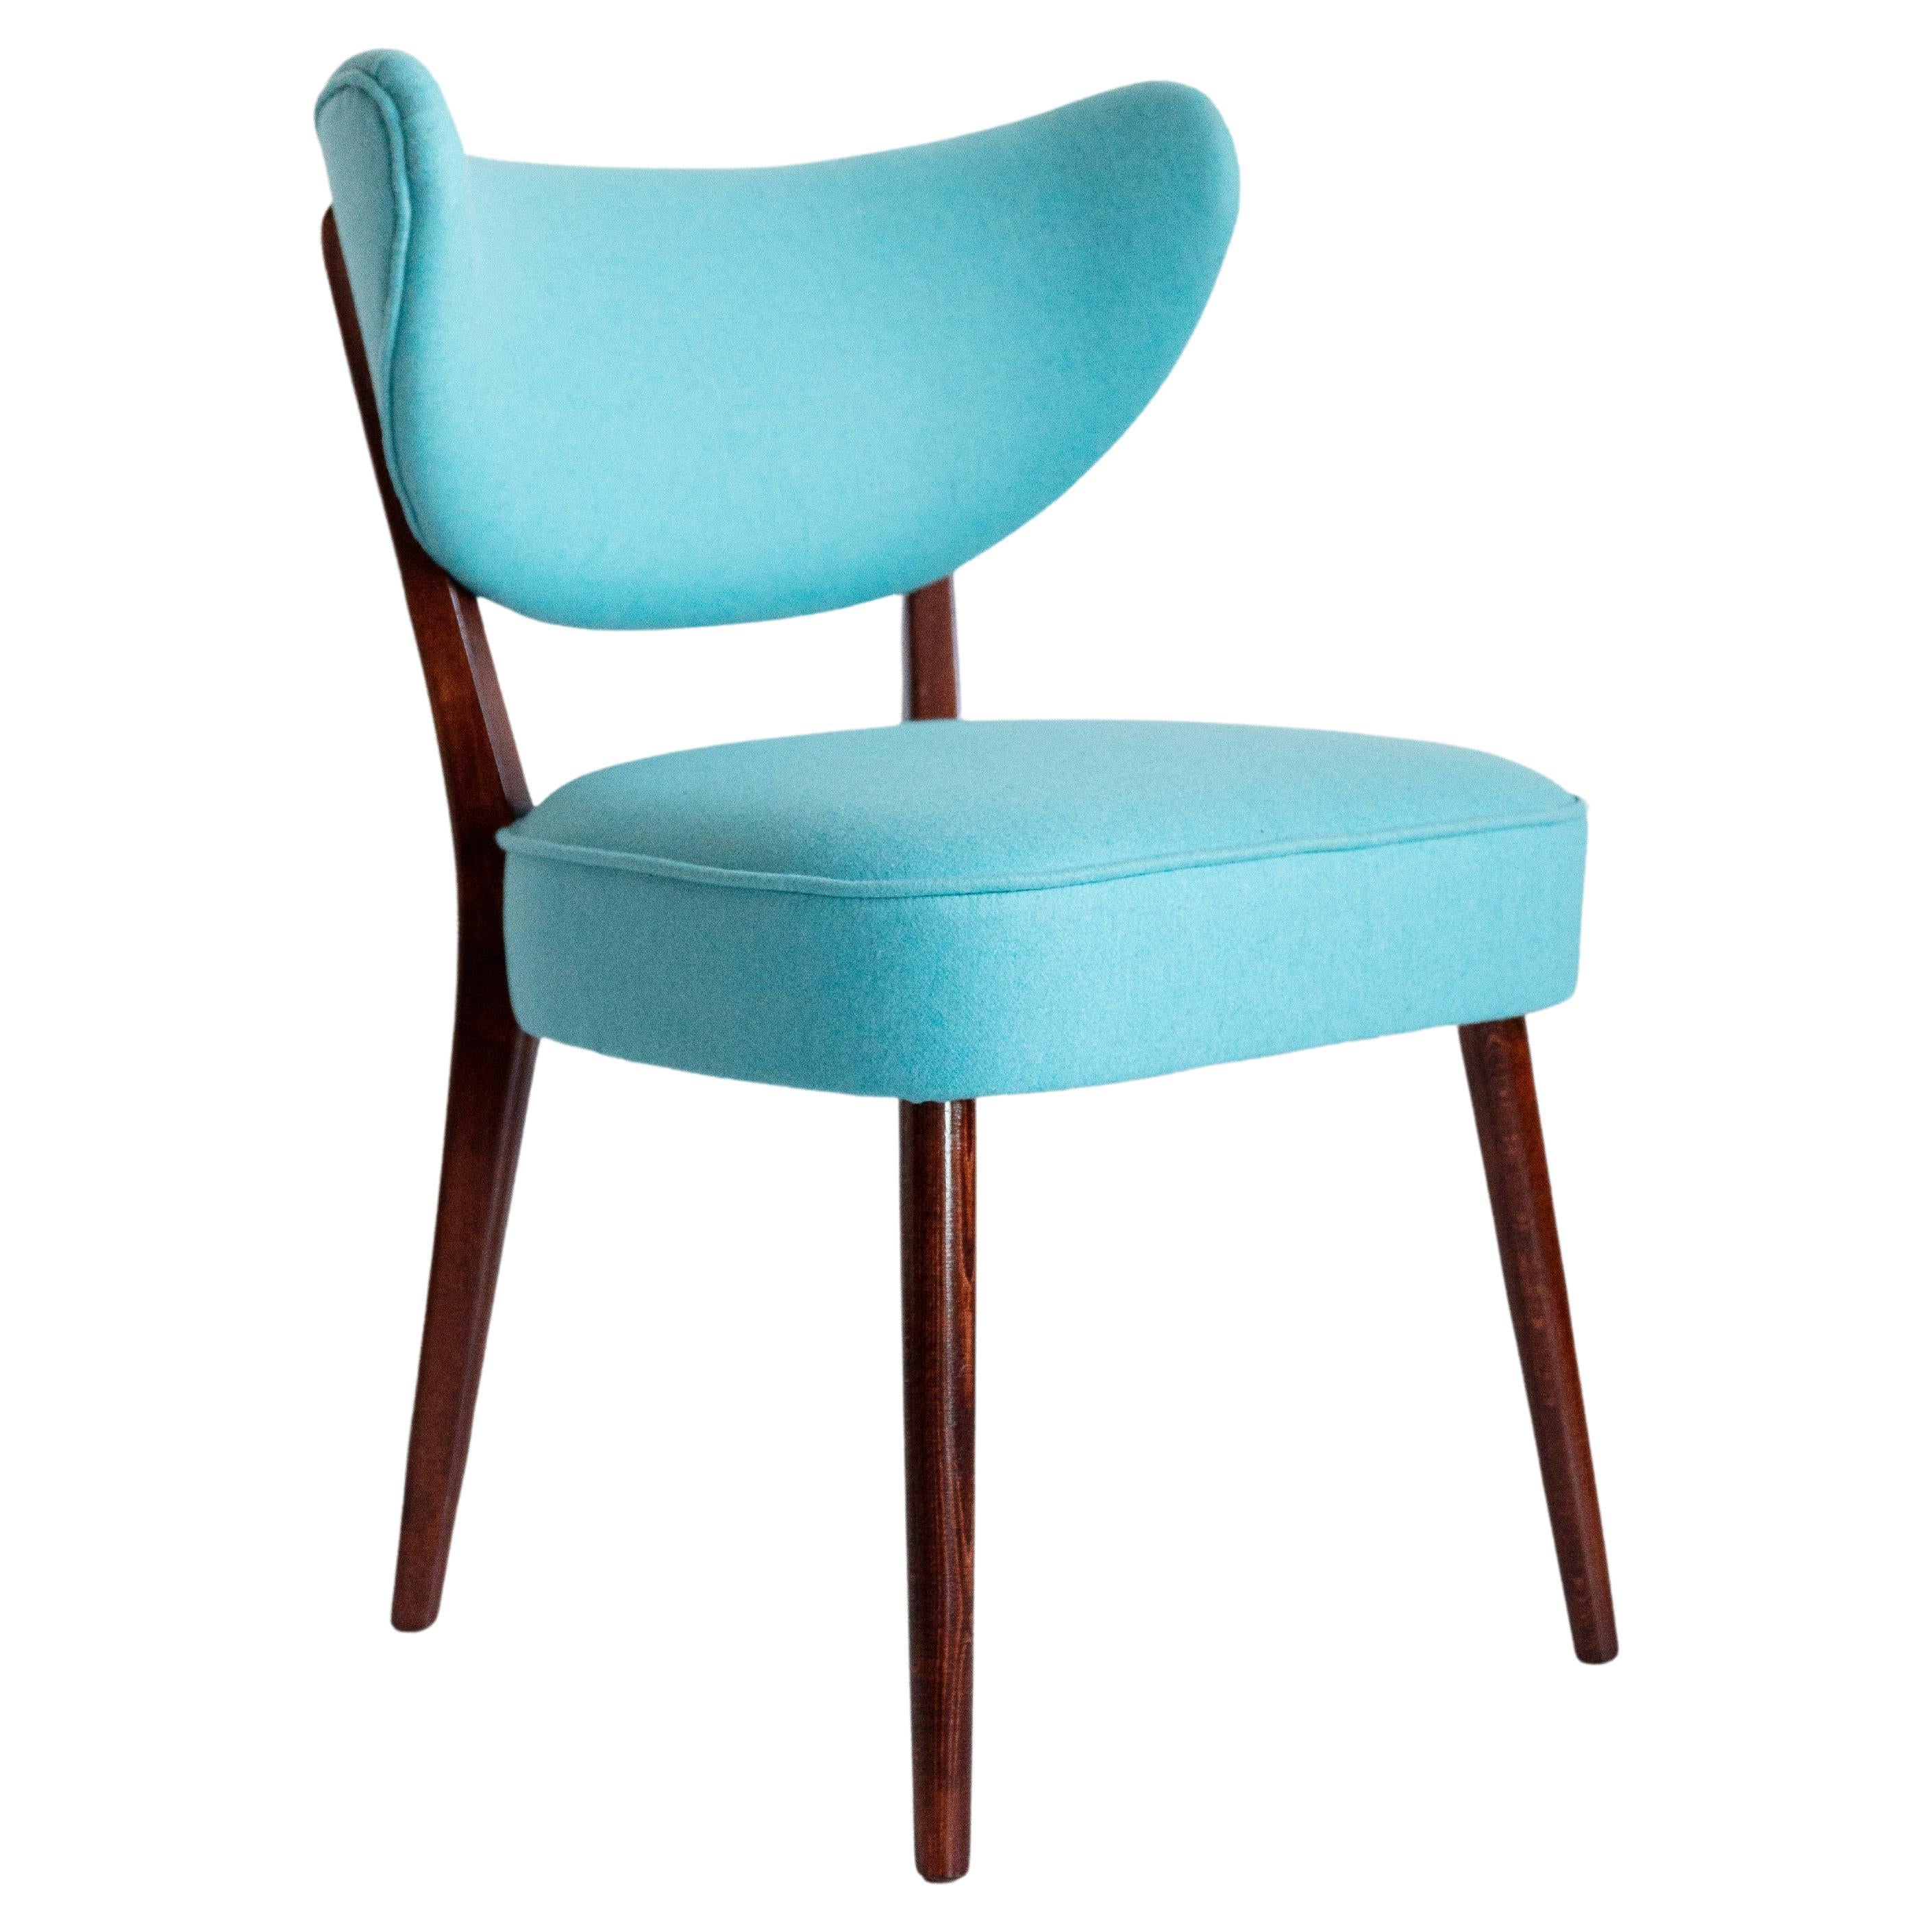 Shell Dining Chair, Turquoise Wool, by Vintola Studio, Europe, Poland For Sale